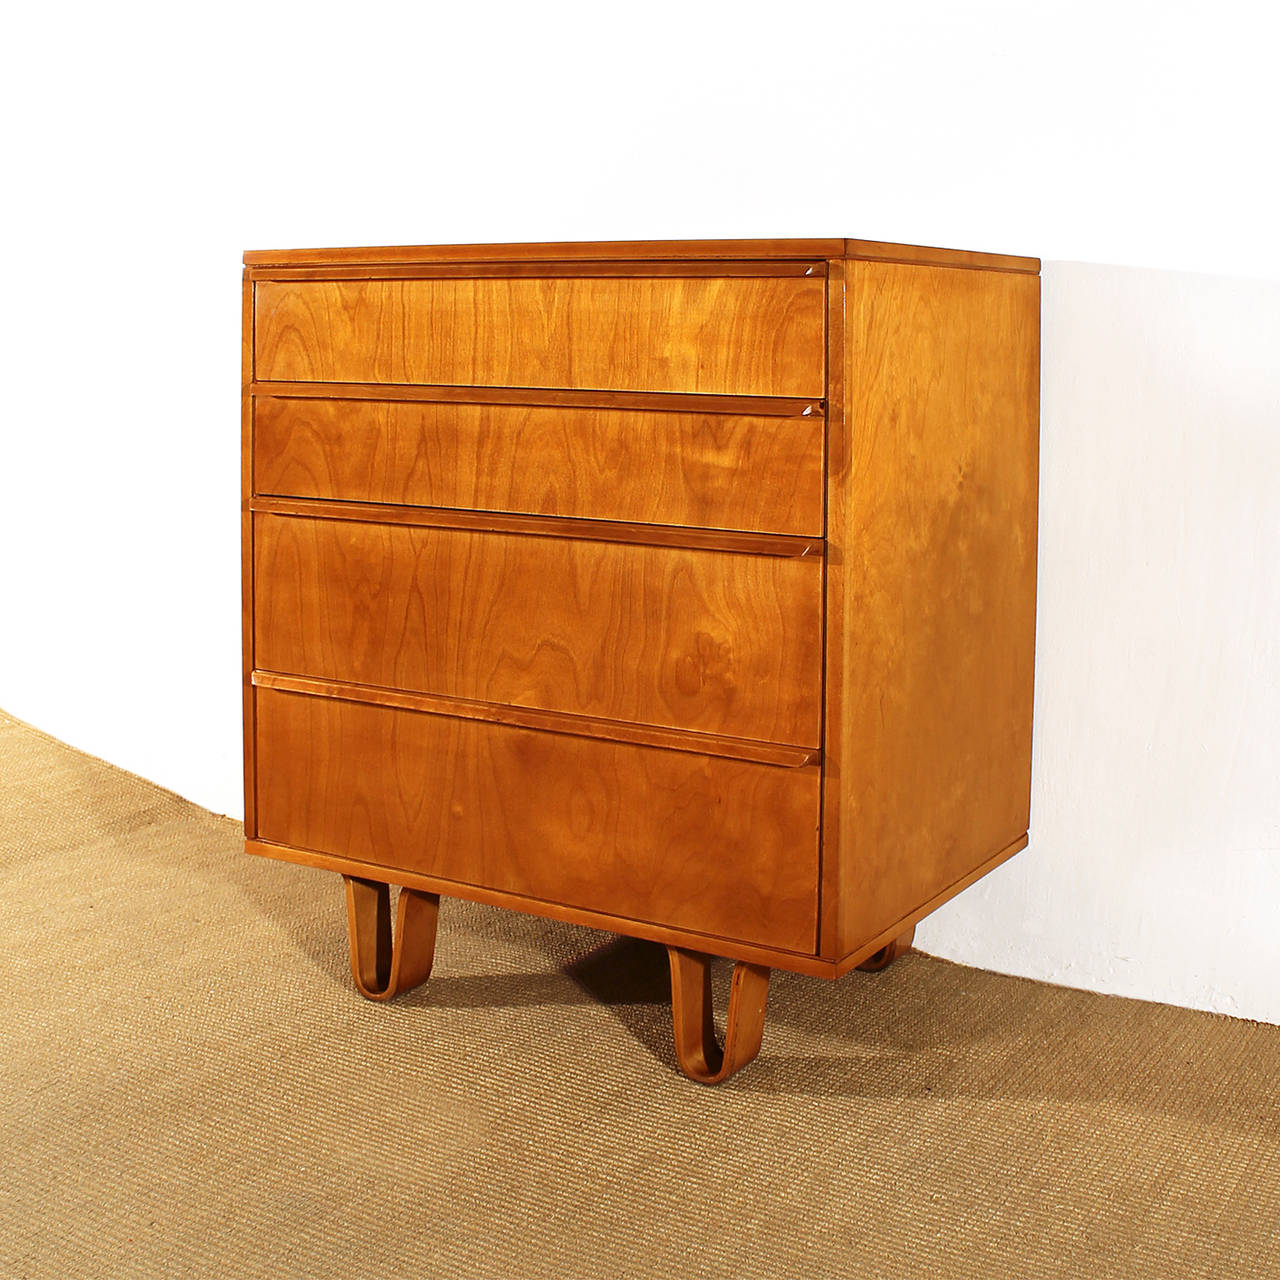 Small commode, 4 different sizes drawers, maple wood, french polish.
Design: Cees Braakman
Maker: Pastoe
Utrecht, Netherlands 1954